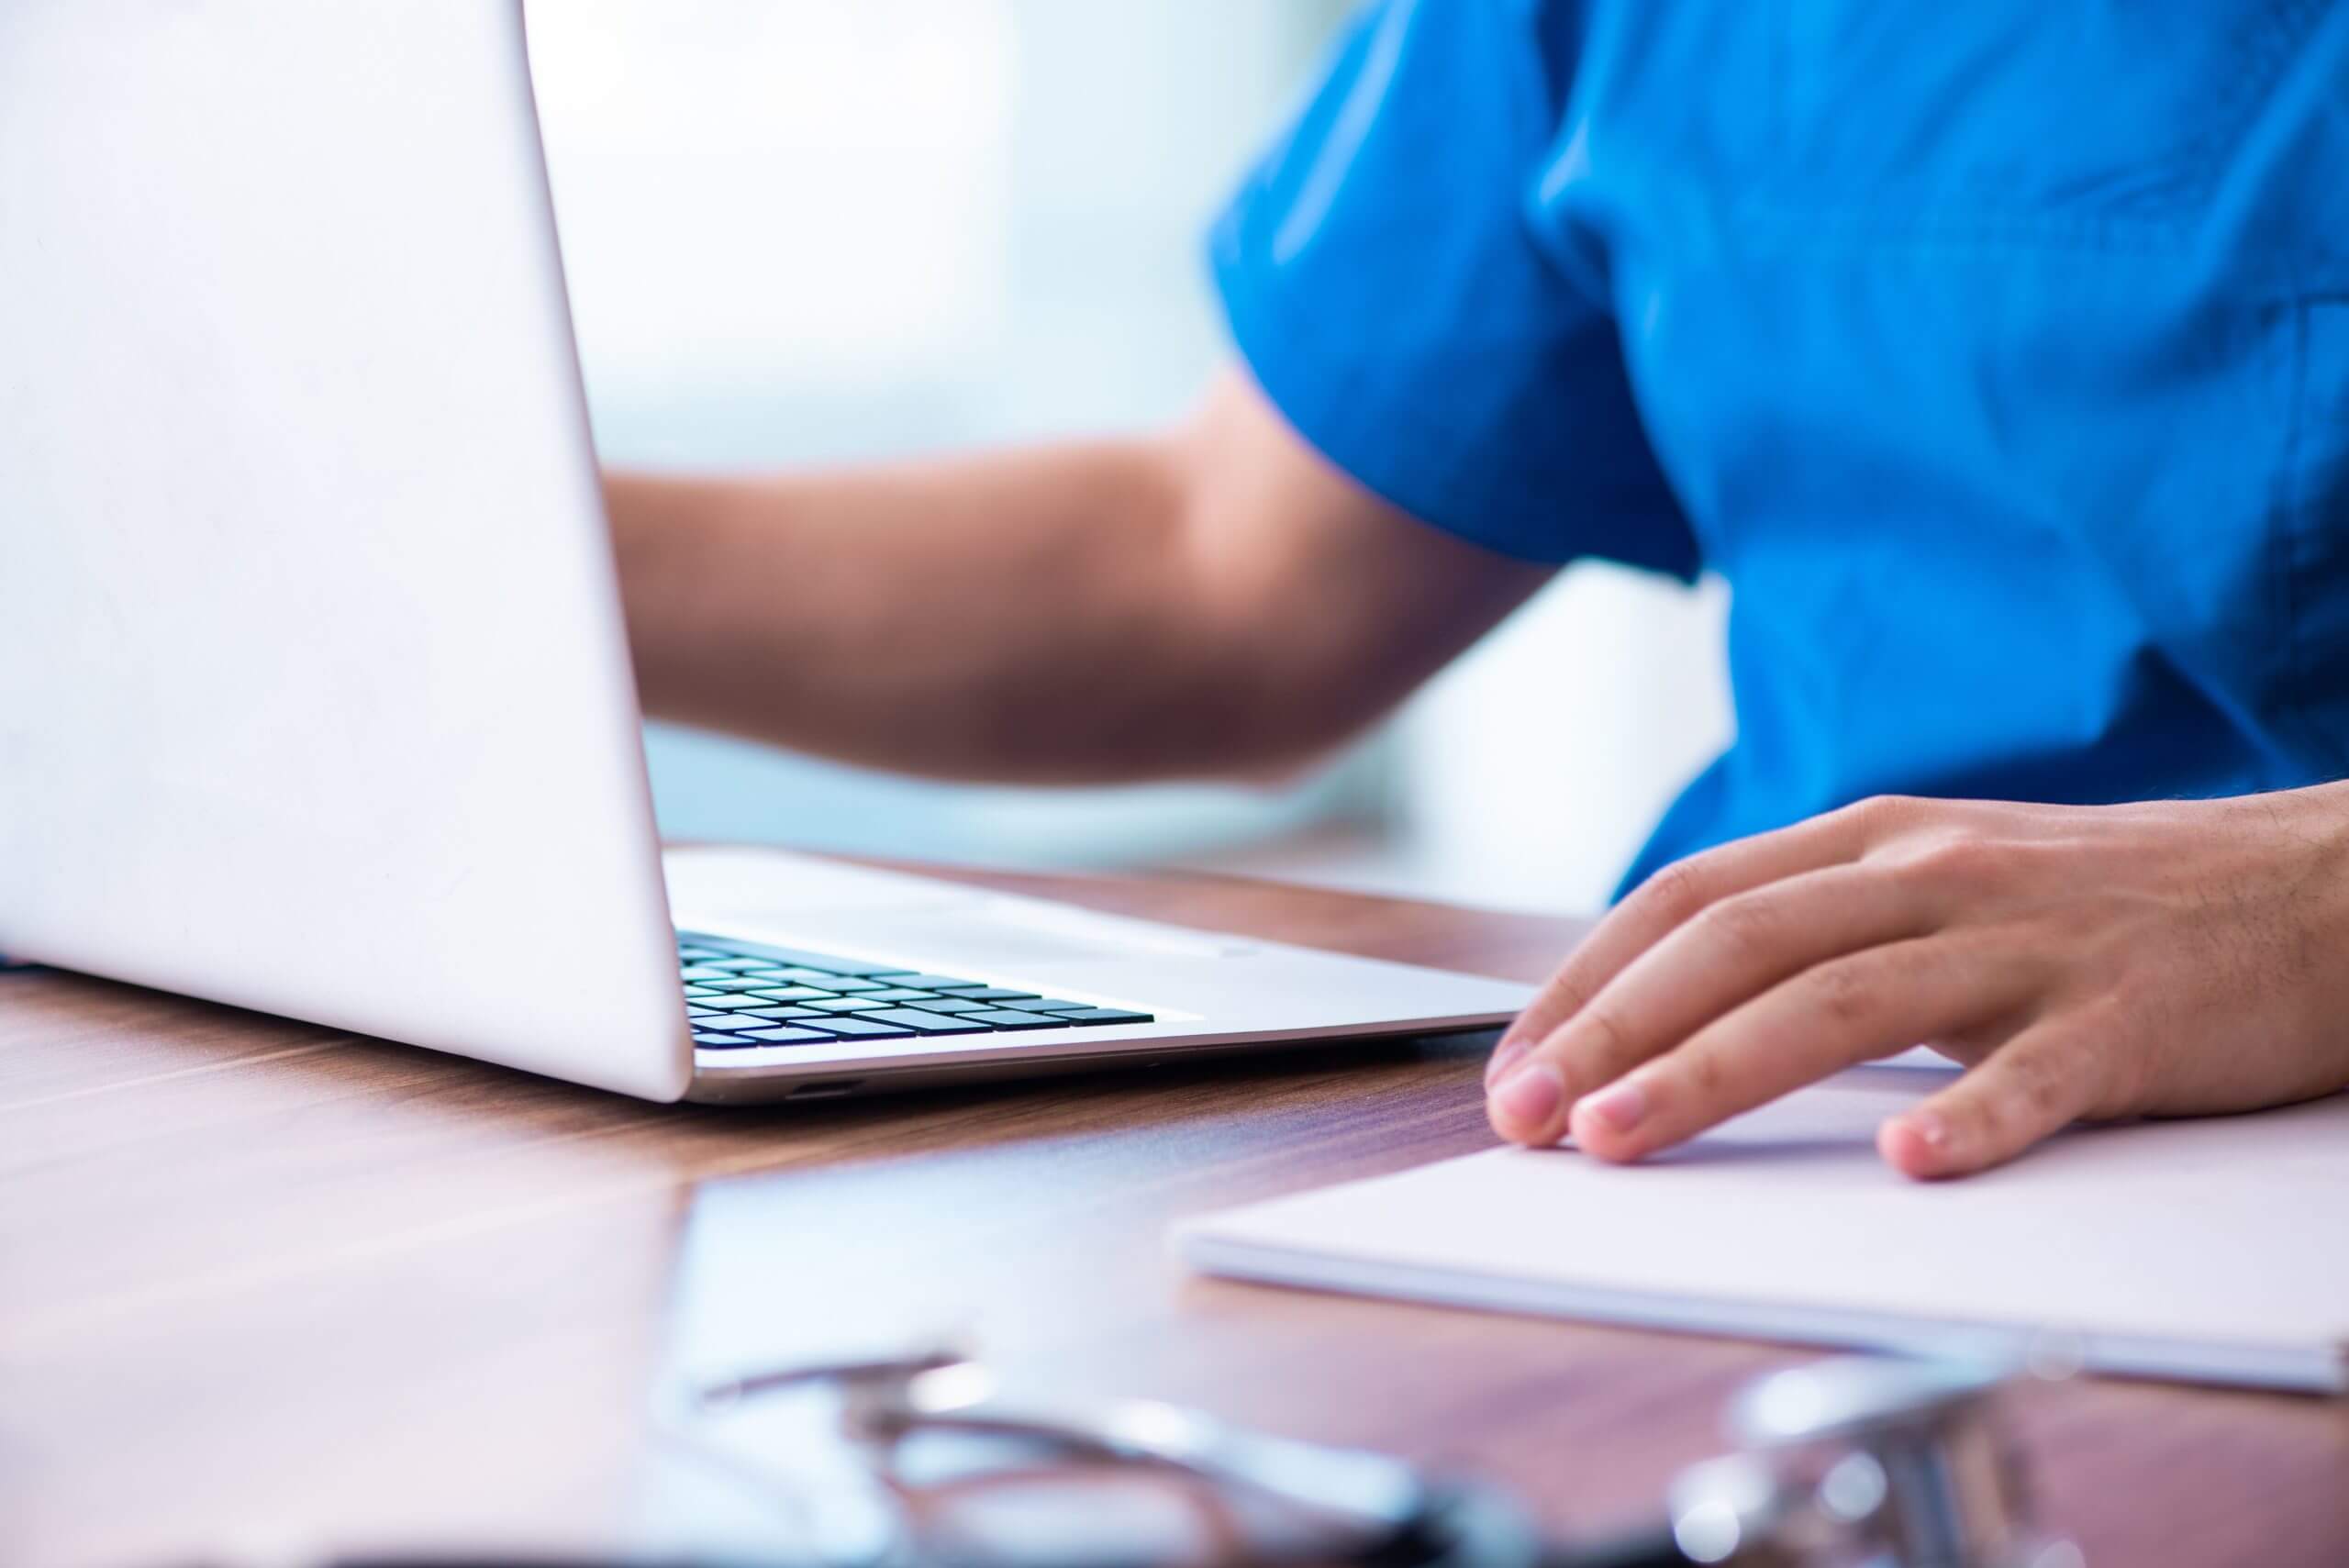 Patient on laptop with HIPAA compliance